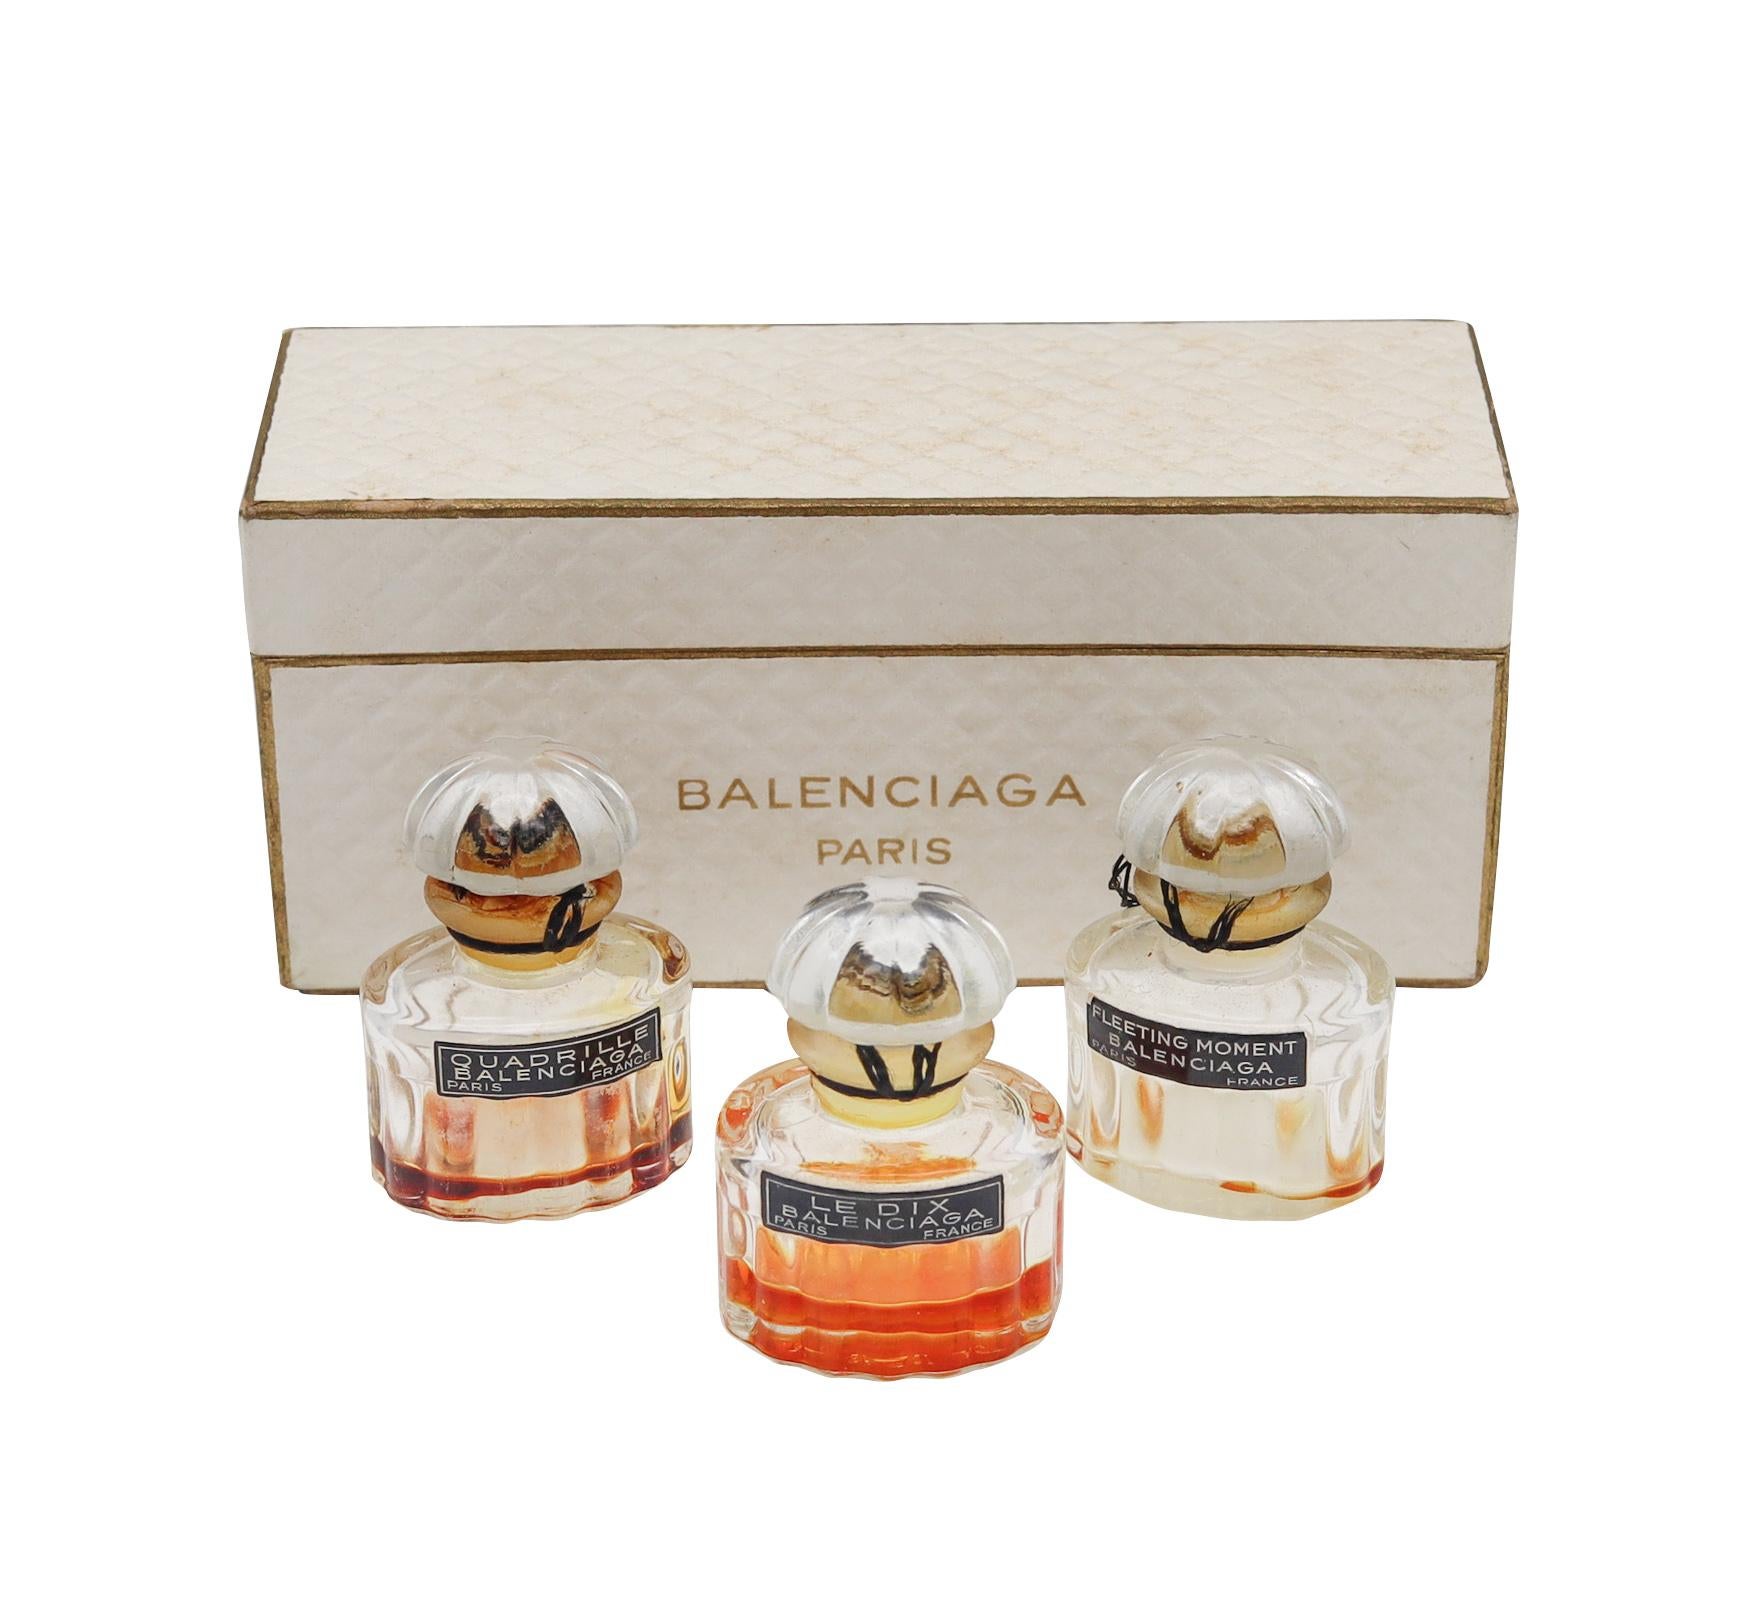 Balenciaga Paris perfume bottles trio in box.

Offered here is a darling trio of great Balenciaga perfumes in little quarter ounce flacons. The perfumes have been opened, and each is still have some remains. It would seem that all labels are still